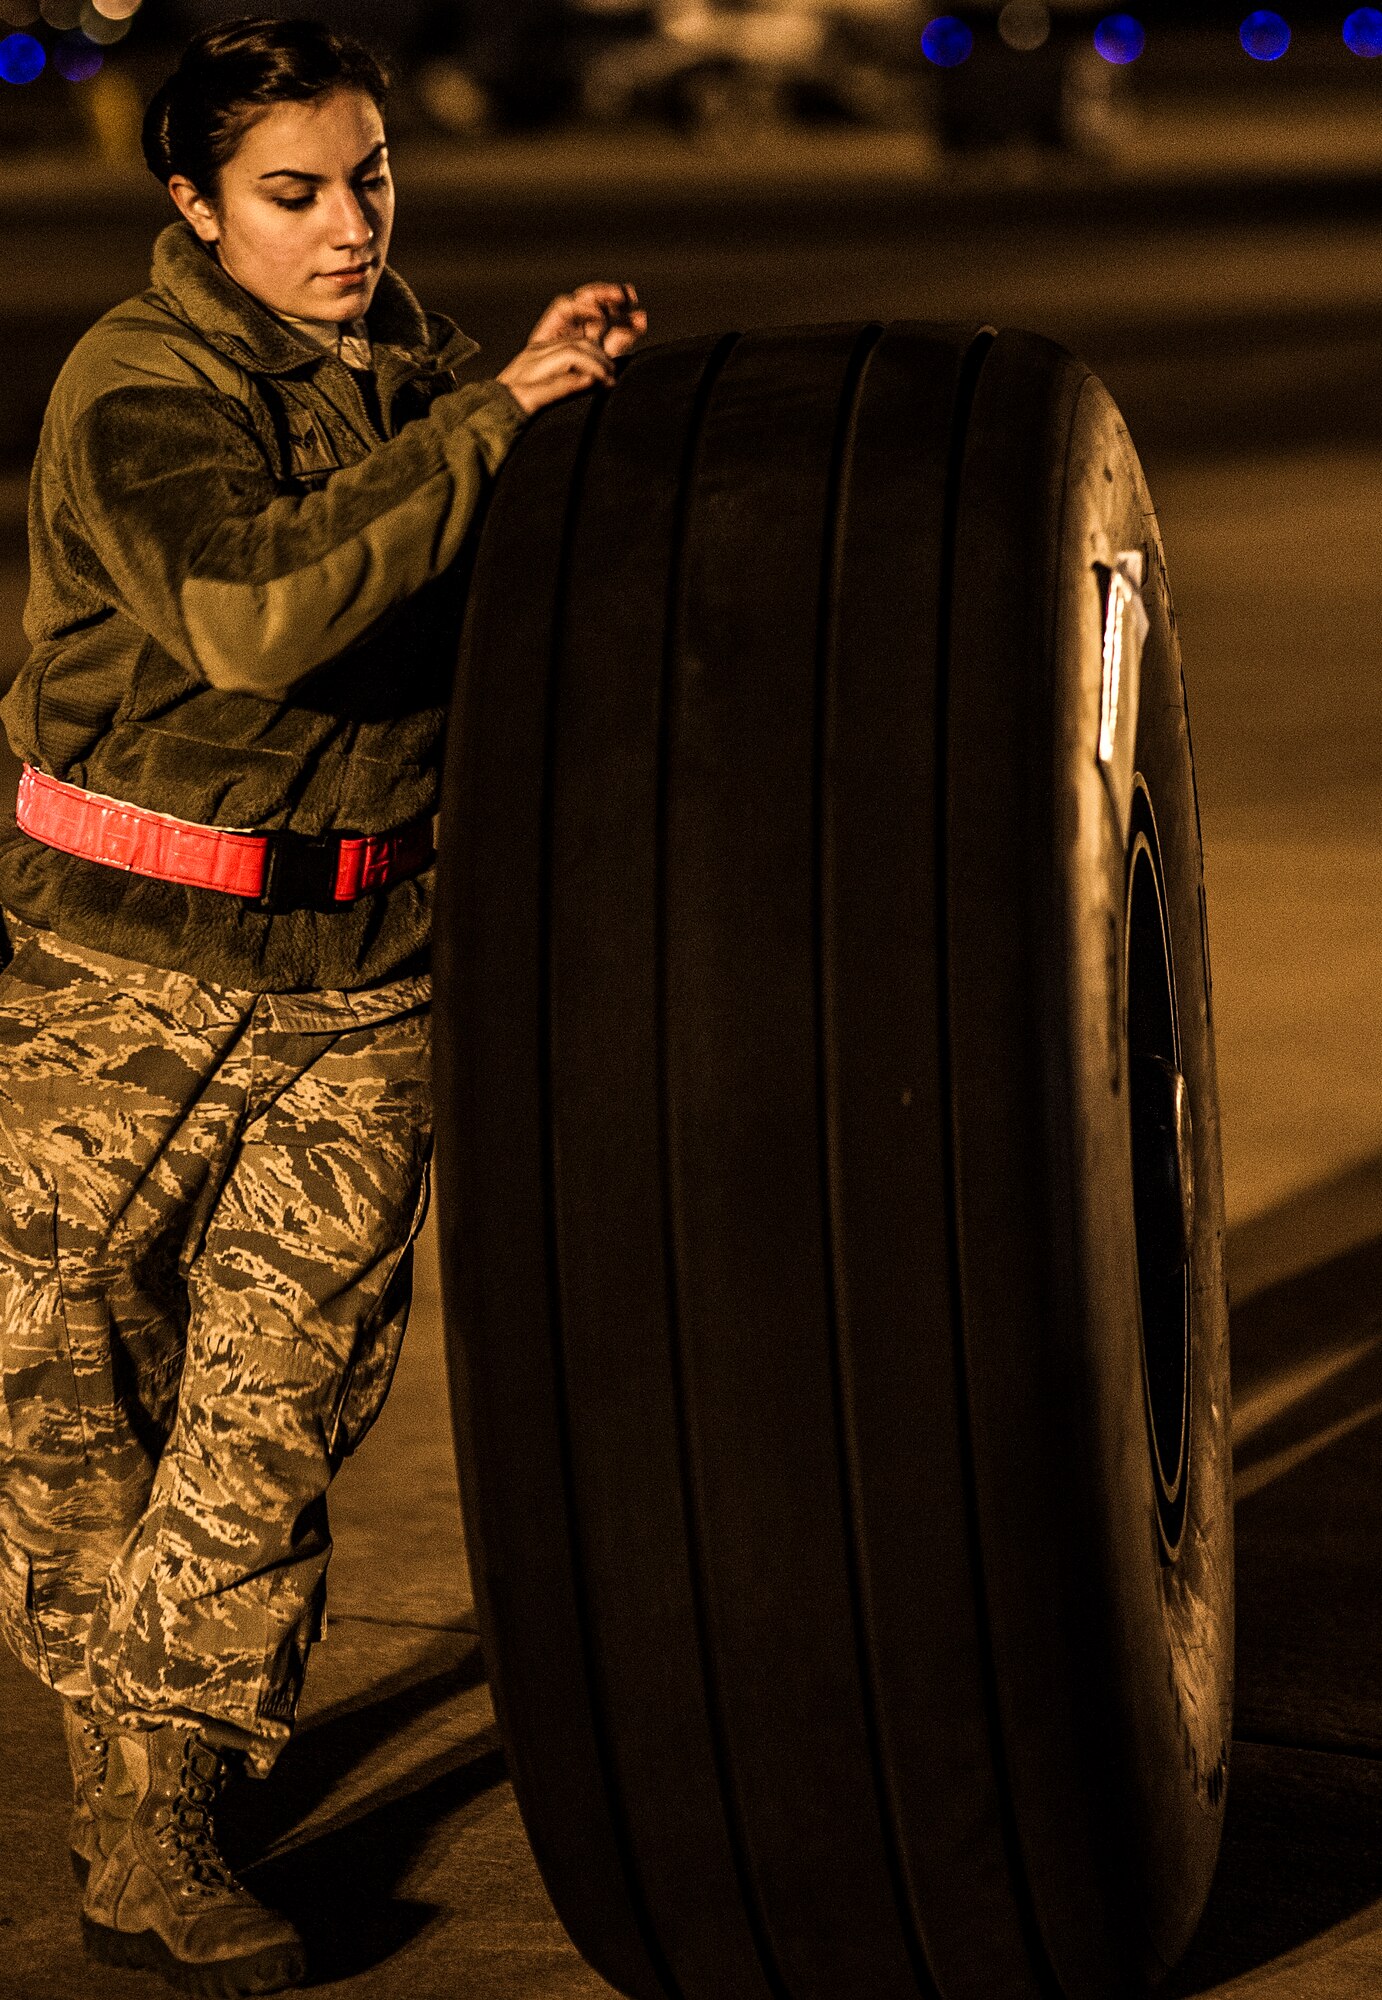 U.S. Air Force Senior Airman Nathalyn Lennon, a crew chief at the 4th Aircraft Maintenance Unit, moves a tire before replacing the brakes of an AC-130U gunship at the flightline on Hurlburt Field, Fla., Feb. 20, 2013. The 4th AMU maintains the AC-130U gunship and supports training and contingency requirements of the 4th and 19th Special Operations Squadrons. (U.S. Air Force photo/Airman 1st Class Christopher Callaway)